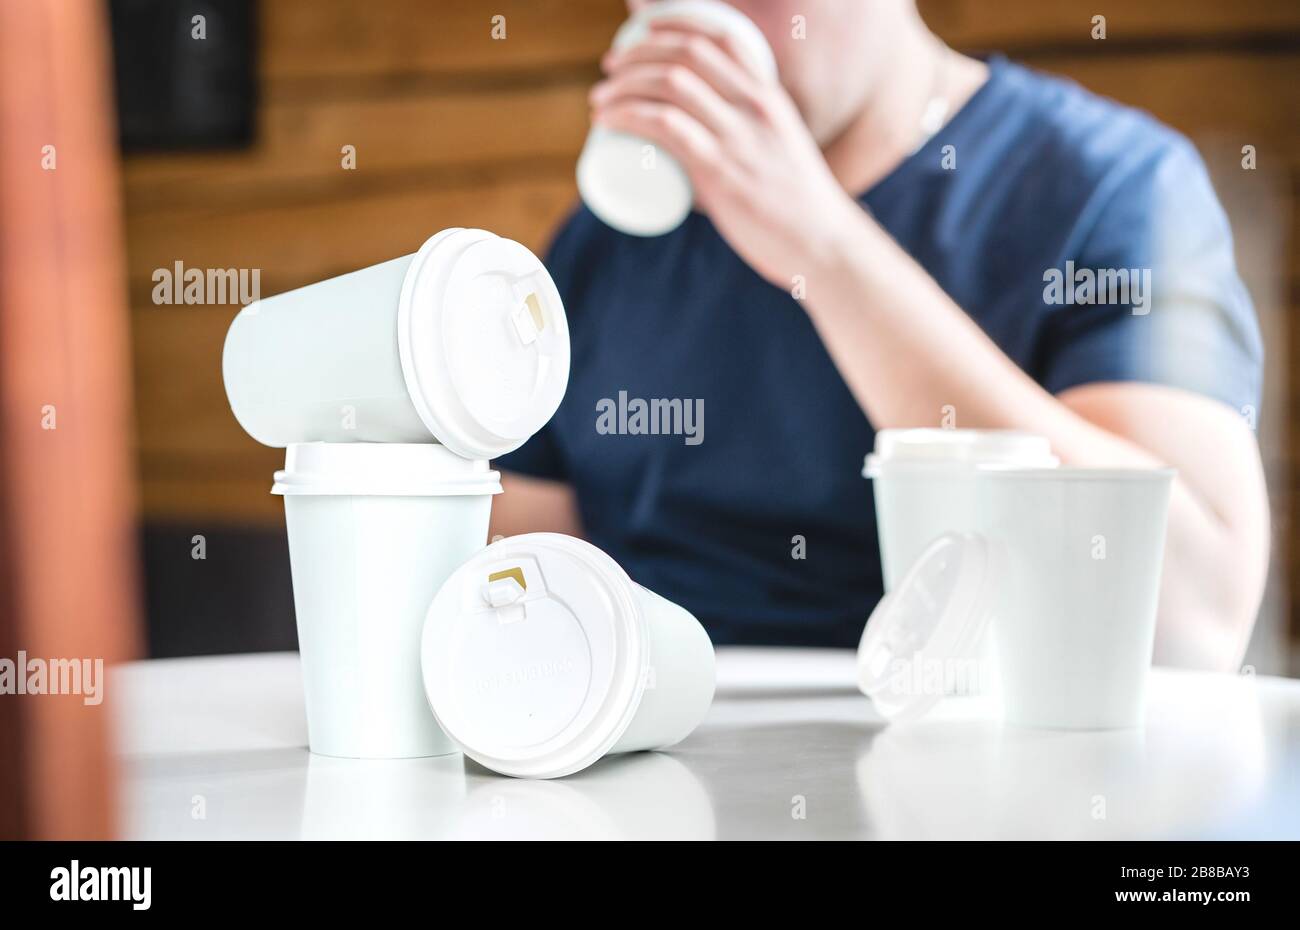 Coffee or caffeine addiction concept. Addicted or thirsty man drinking too much. Addict with many empty take away paper cups on table. Stock Photo